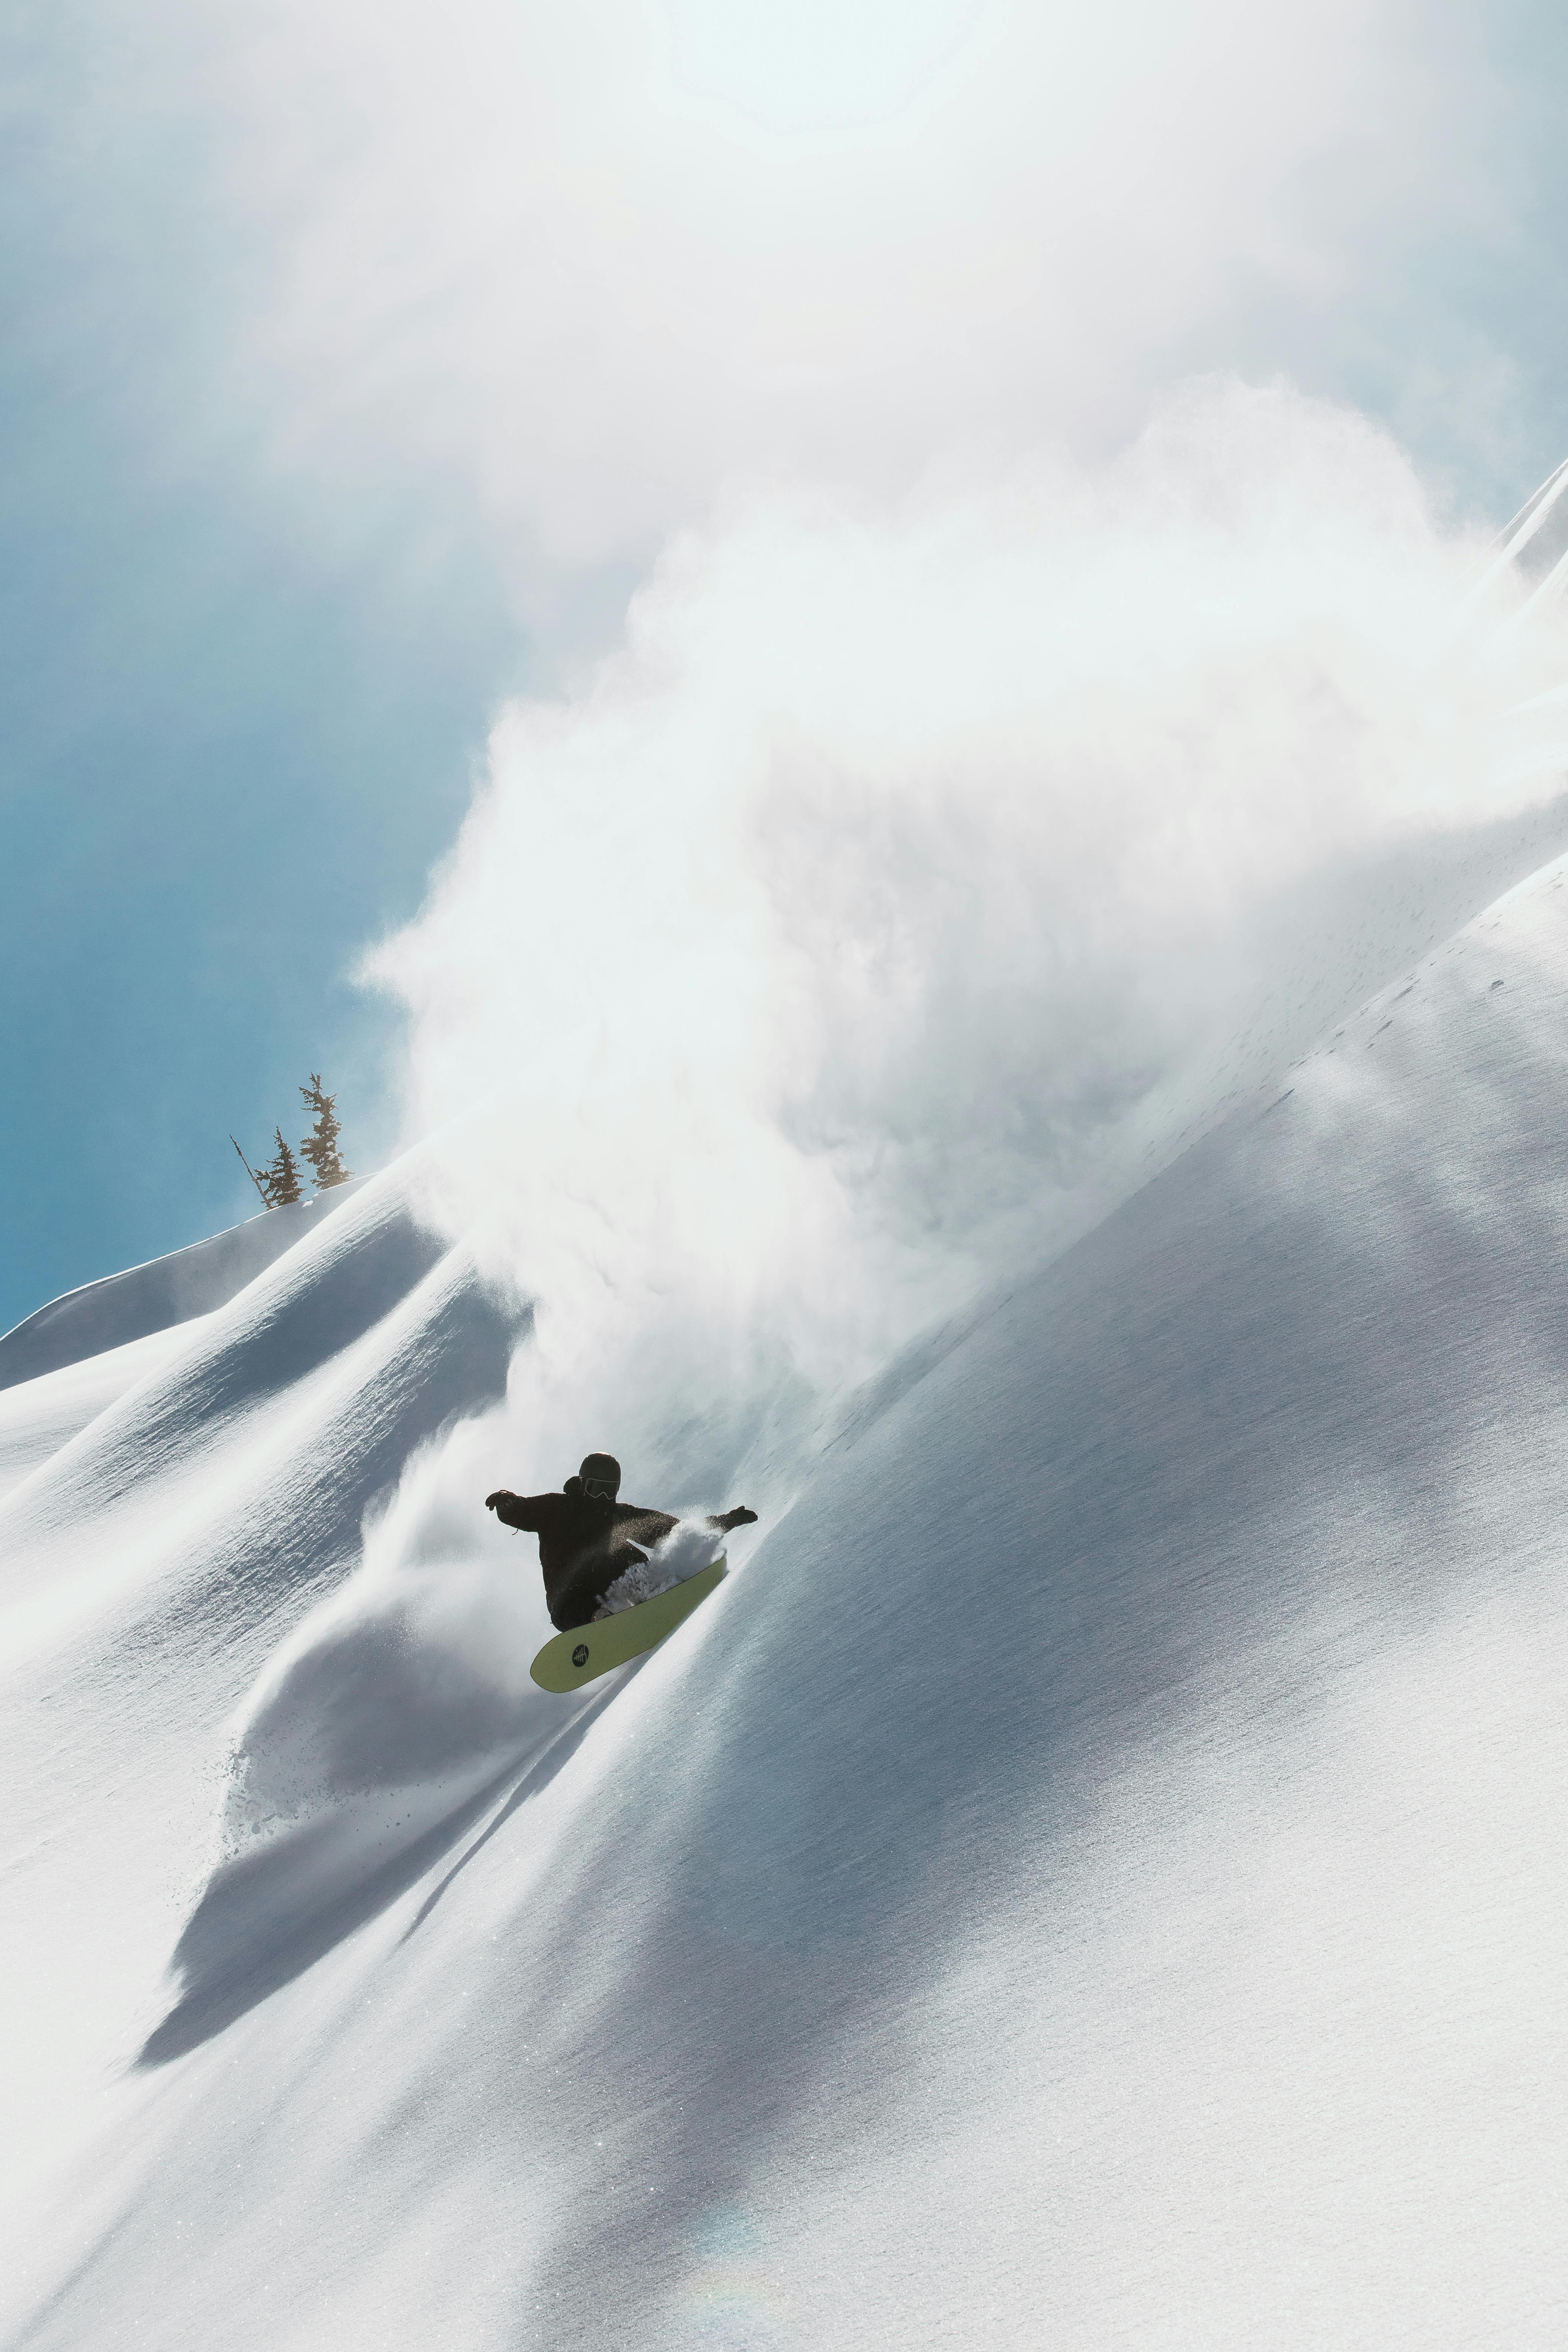 Dave carves on his board, sending up a huge cloud of powder on a bluebird day. 